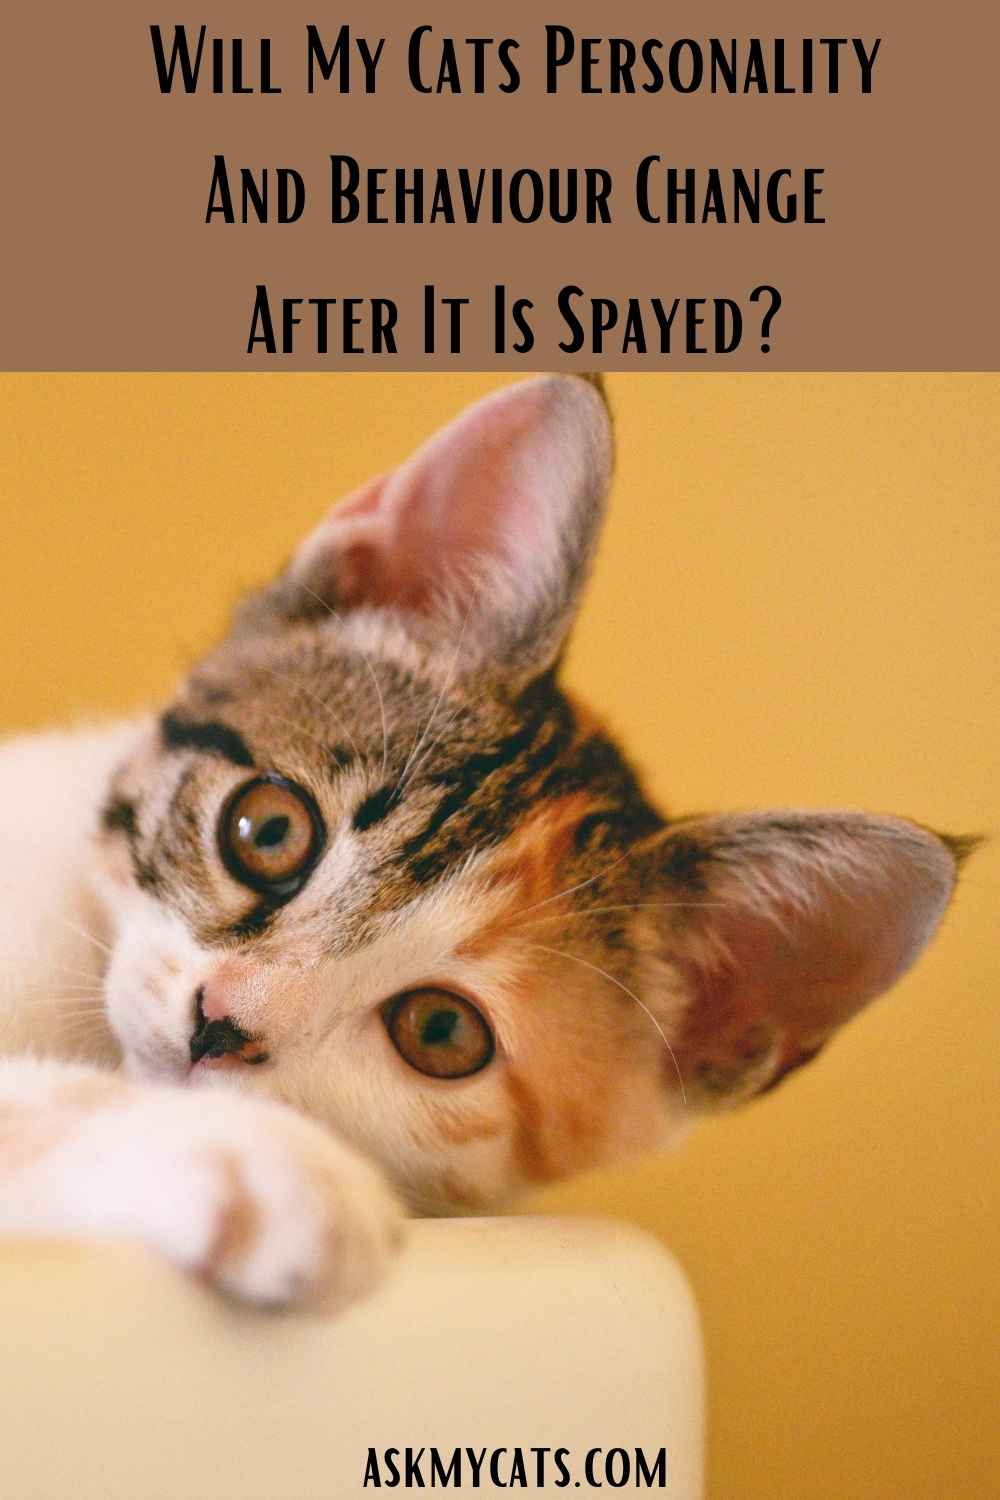 Do Cats Get Nicer After Being Spayed? Has Spay Affected My Cats Behavior?